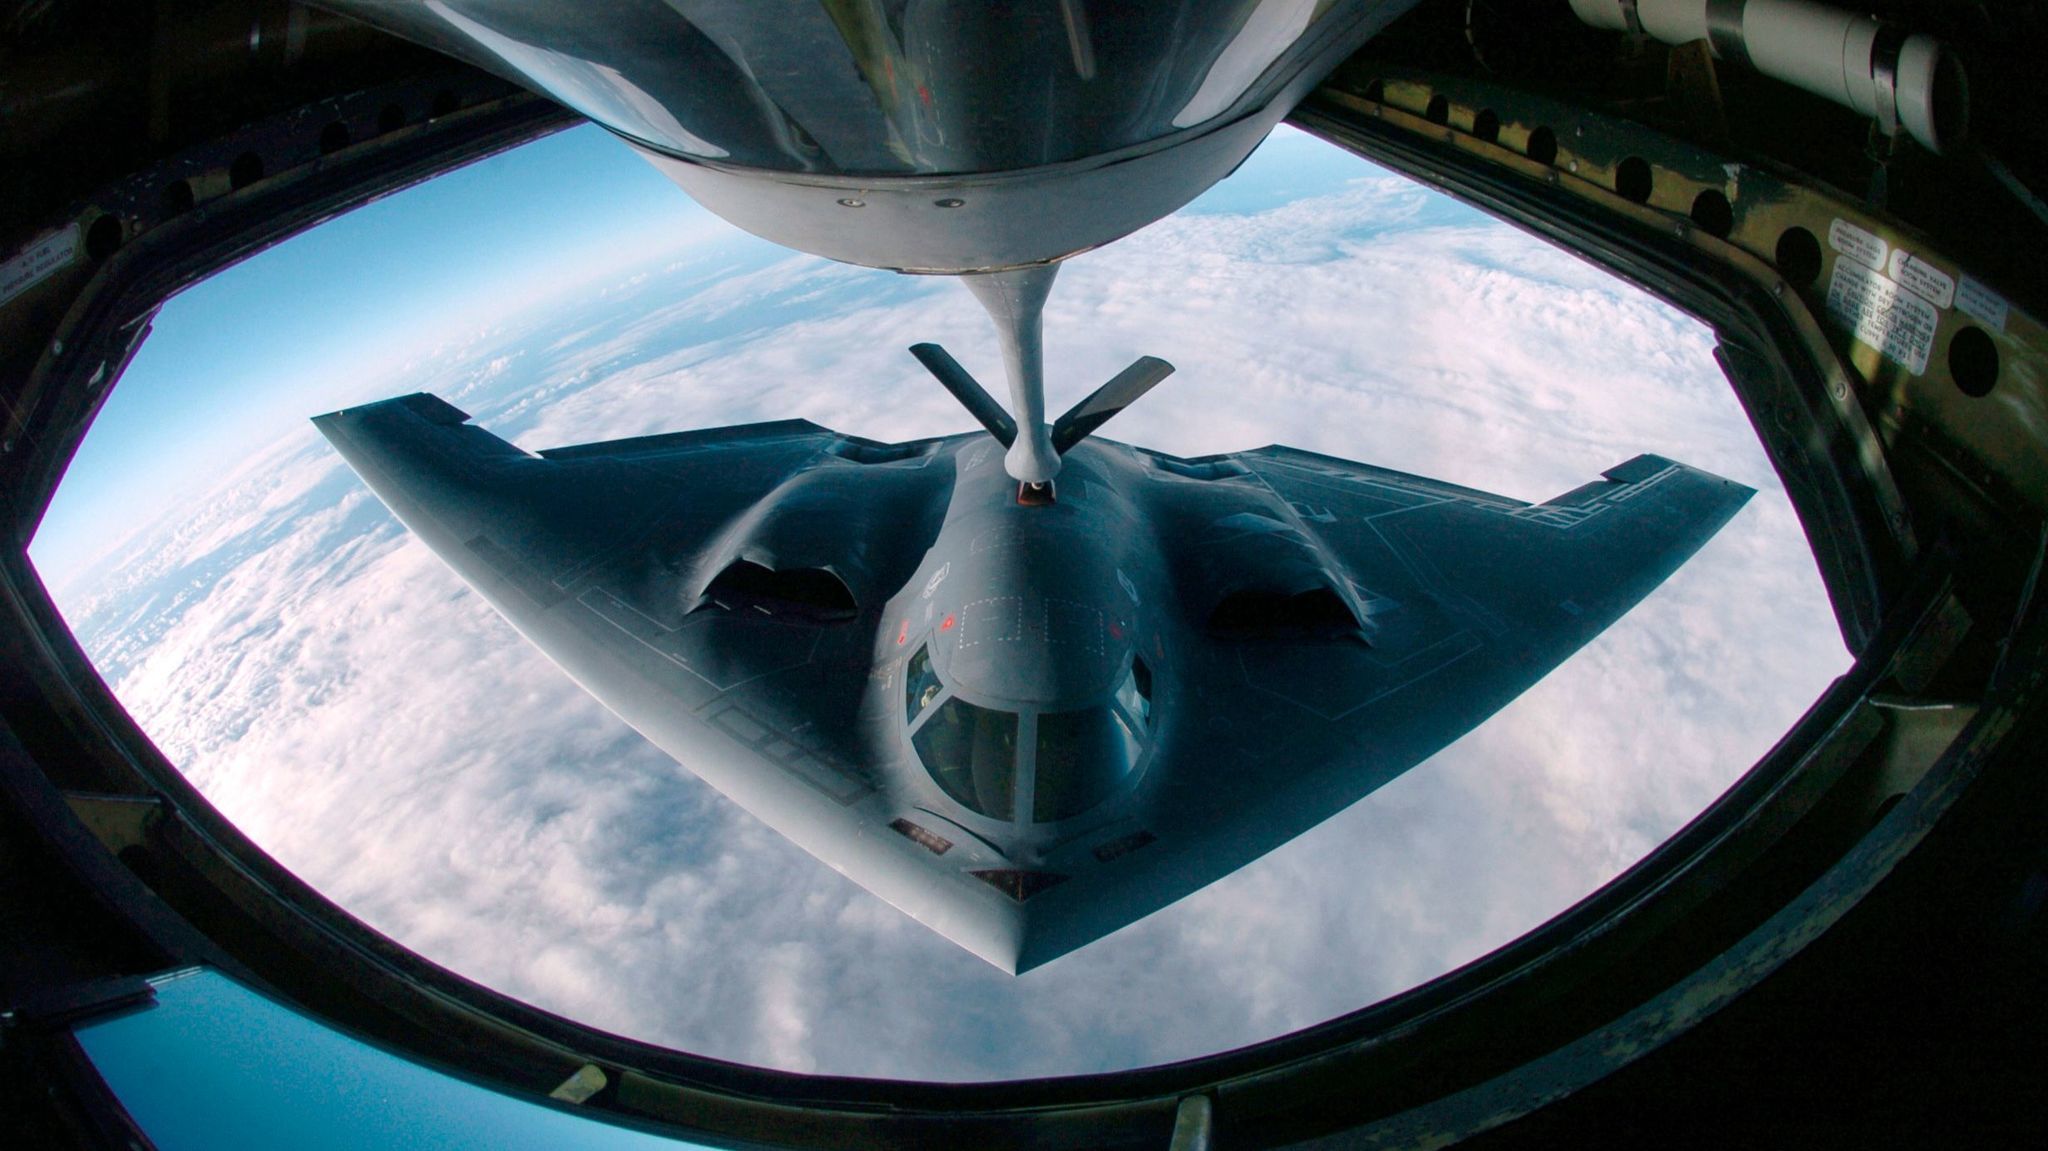 A B-2 bomber refueling from a KC-135 Stratotanker over the Pacific Ocean. The B-21 will be designed to be even stealthier than the B-2.